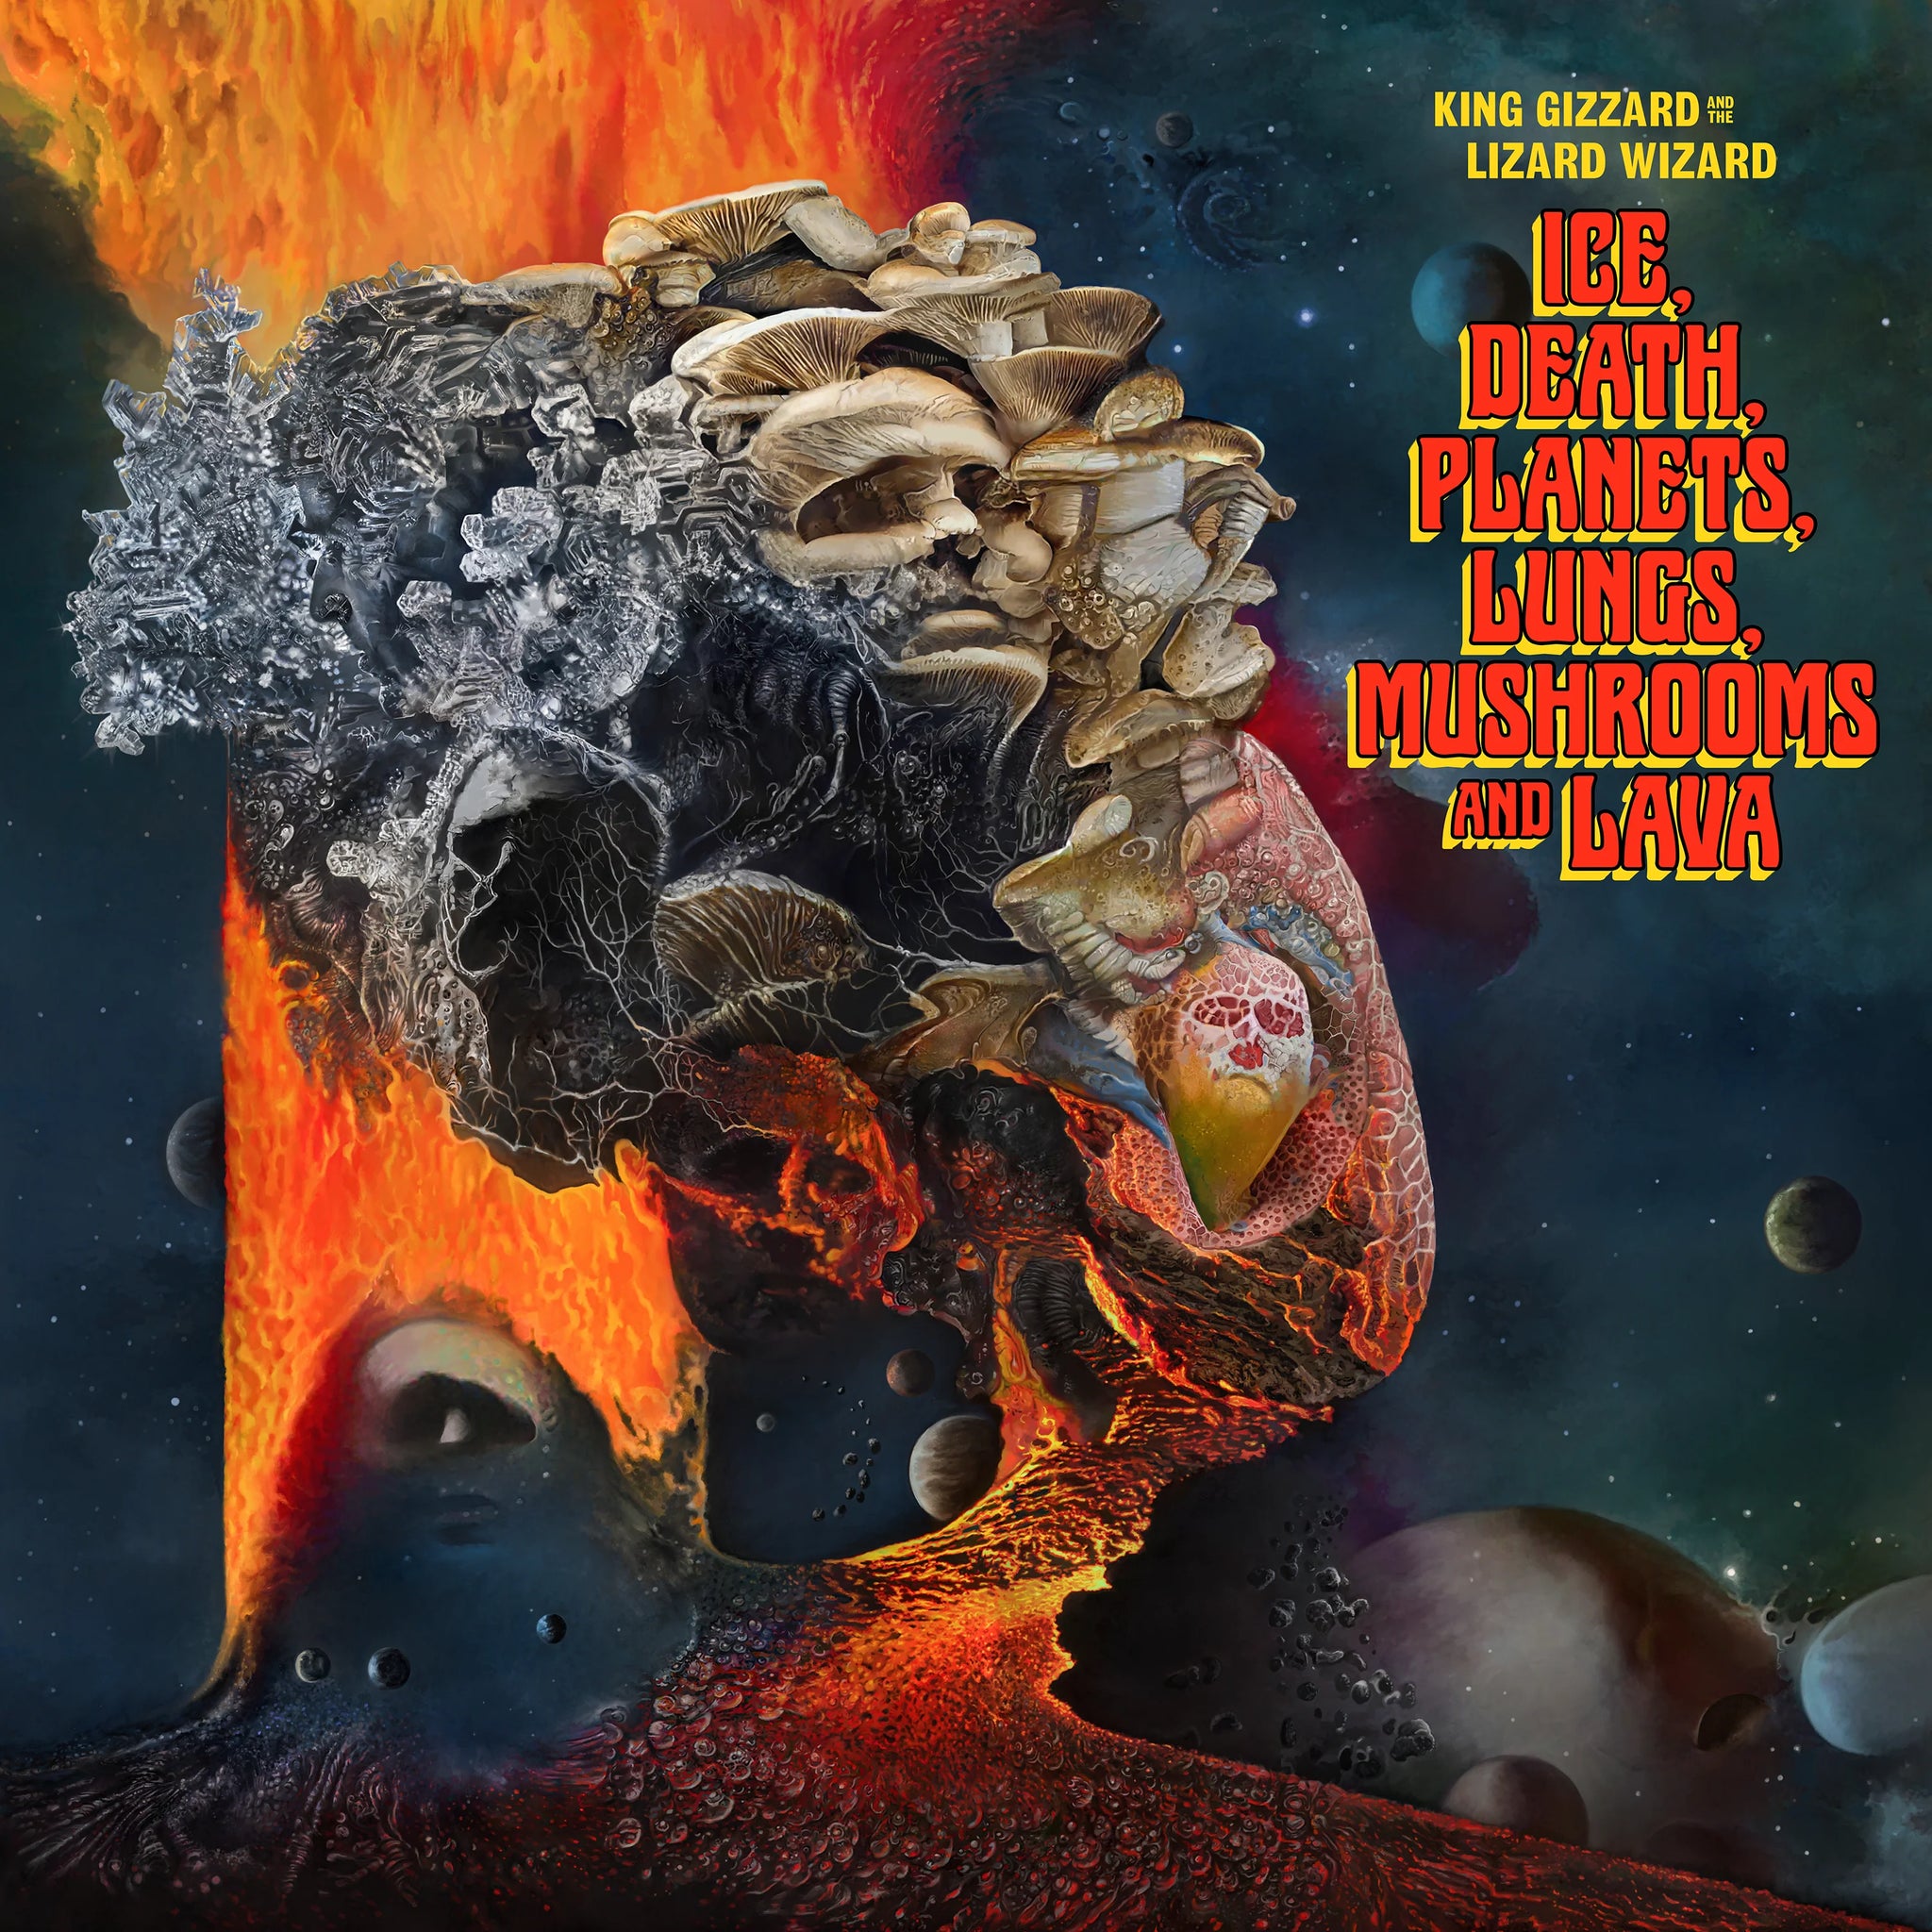 KING GIZZARD AND THE LIZARD WIZARD - ICE, DEATH, PLANETS, LUNGS, MUSHROOMS, AND LAVA Vinyl 2XLP